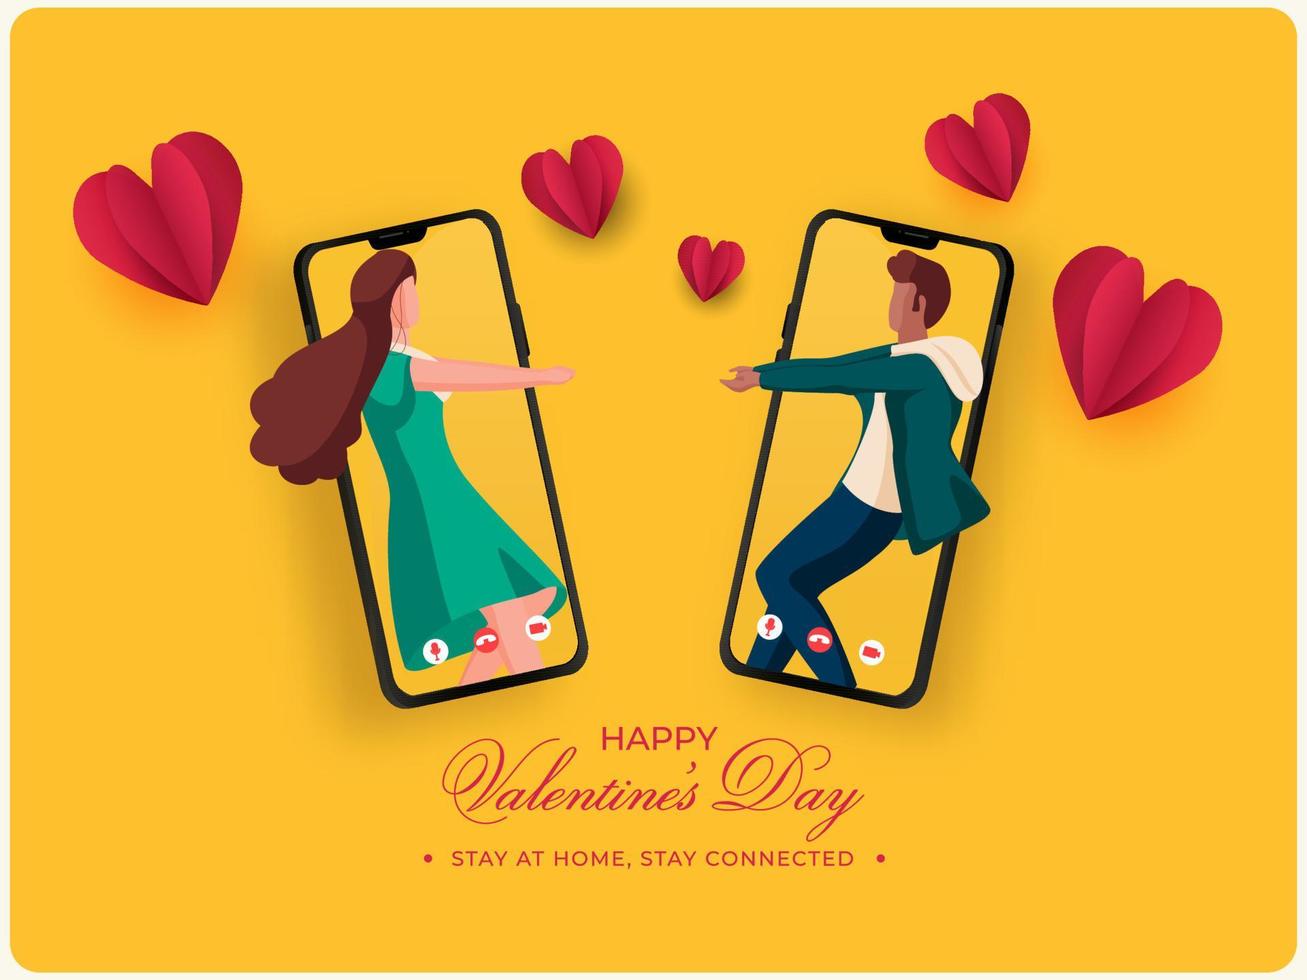 Young Couple Dancing Or Interacting Through Video Call With Paper Hearts On Yellow Background For Happy Valentine's Day, Stay At Home. vector